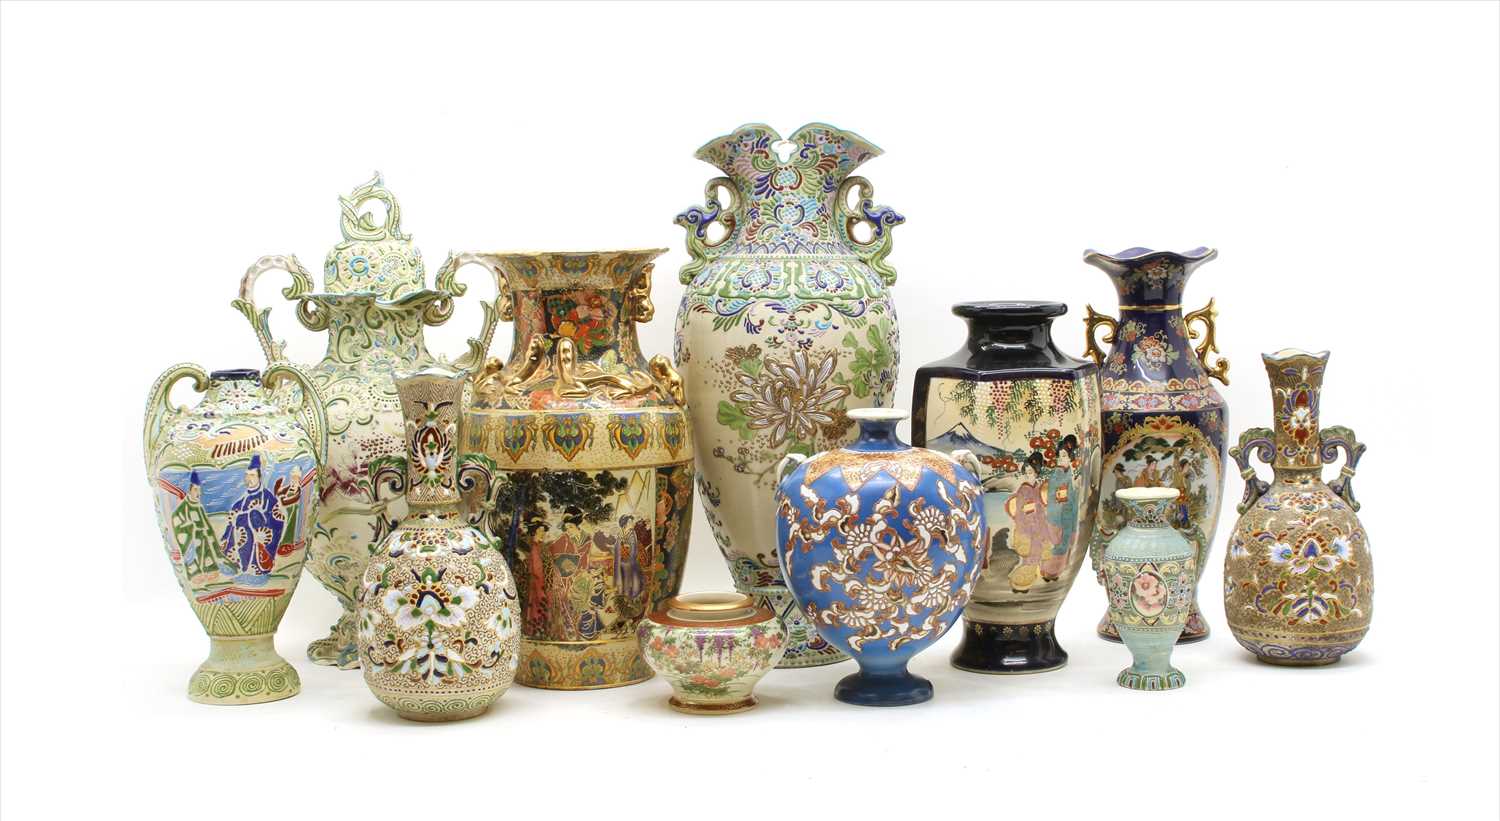 Lot 308 - A collection of Japanese pottery items